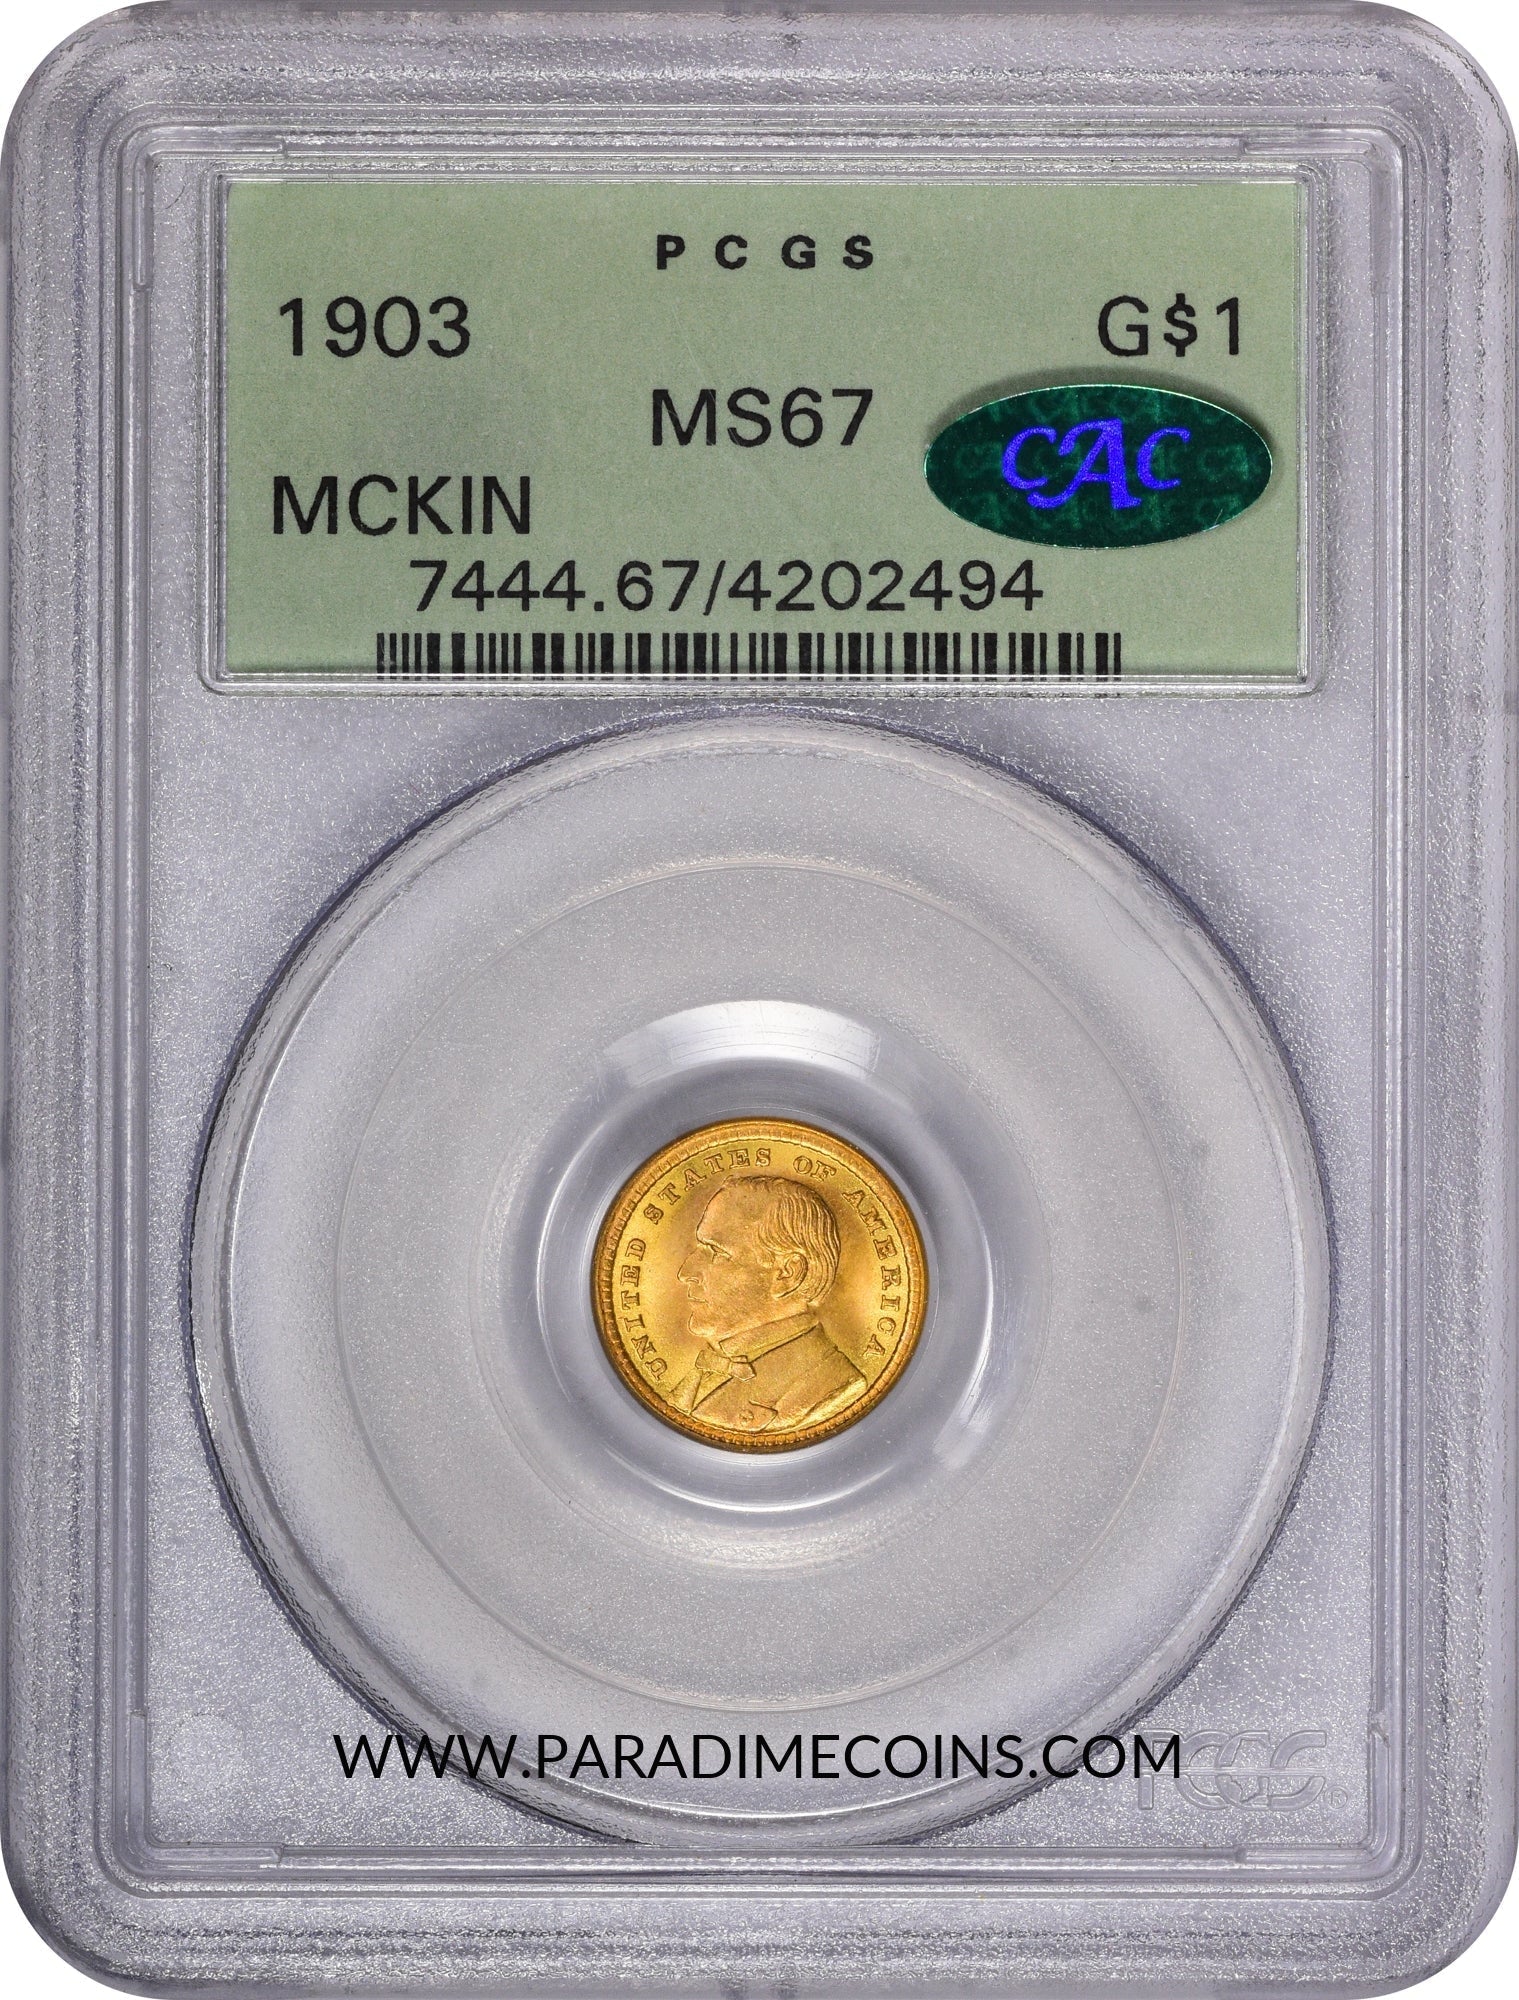 1903 G$1 MCKINLEY MS67 OGH PCGS CAC - Paradime Coins | PCGS NGC CACG CAC Rare US Numismatic Coins For Sale